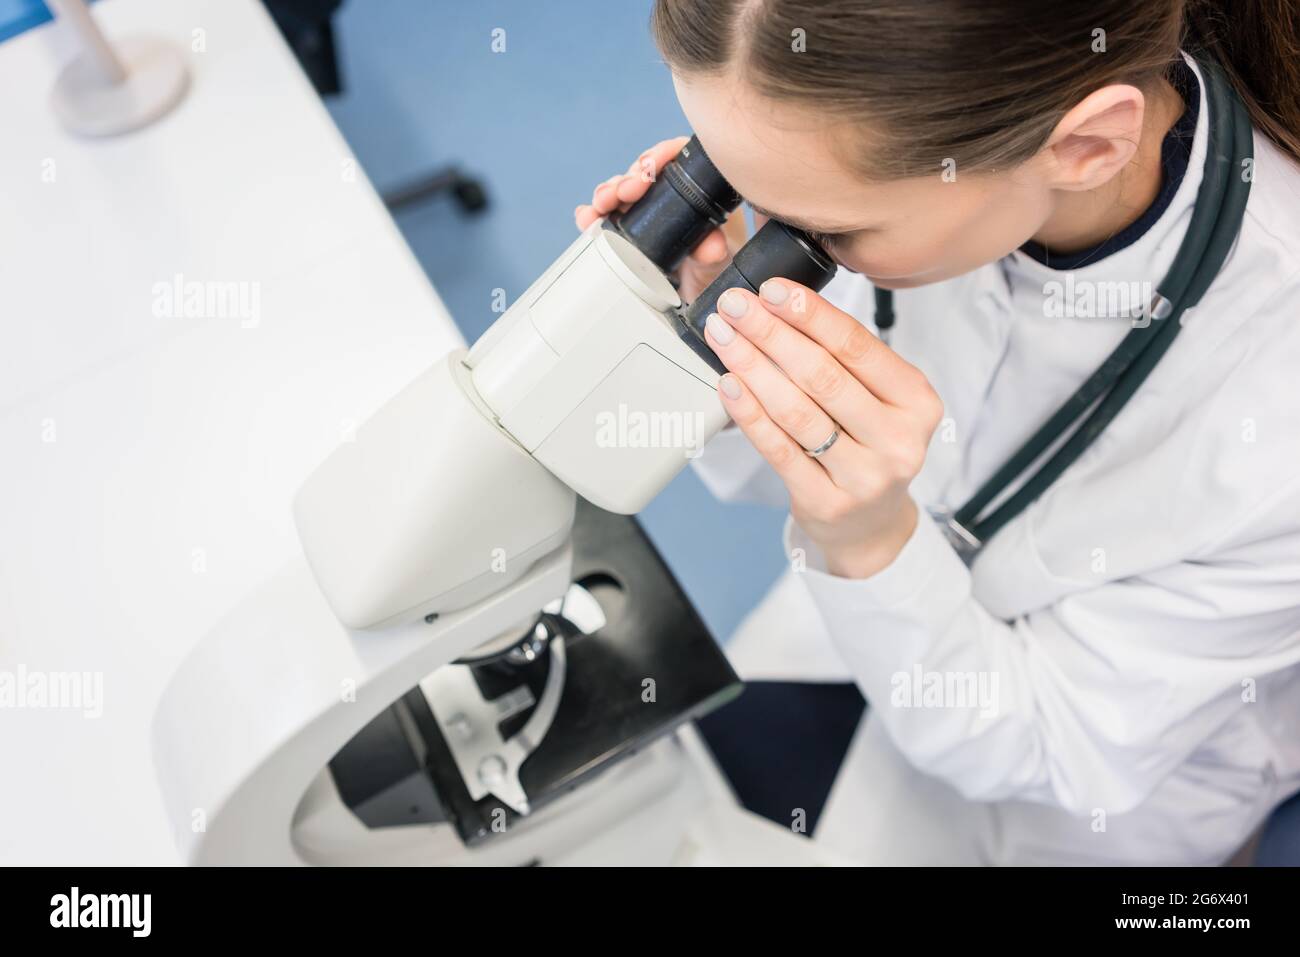 Doctor or biologist with stethoscope scrutinizing tissue under microscope Stock Photo